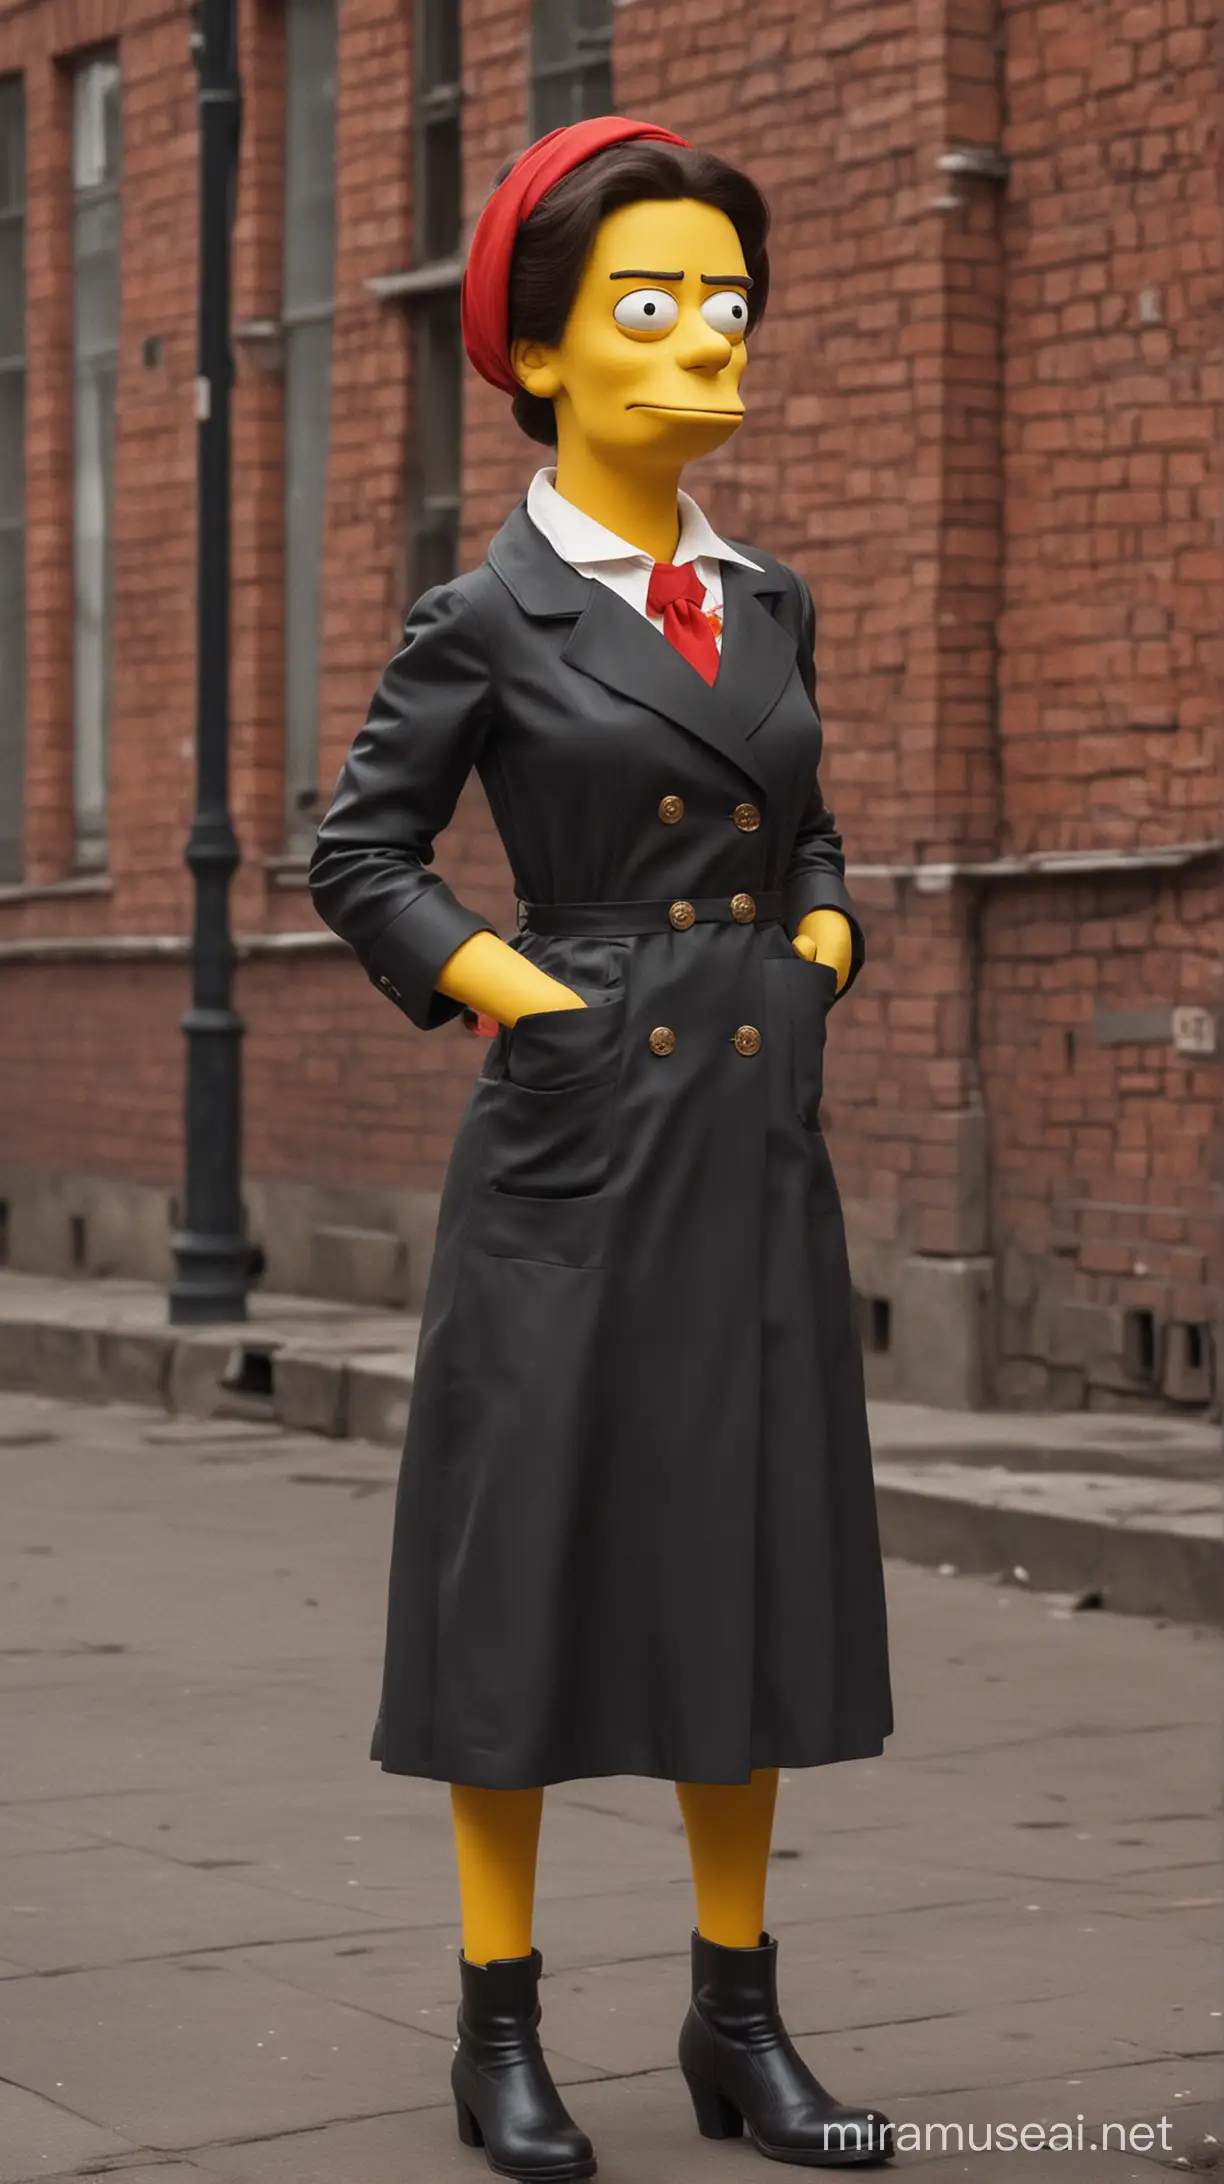 Elly Schlein at Russian revolution  in style of The Simpsons cartoon